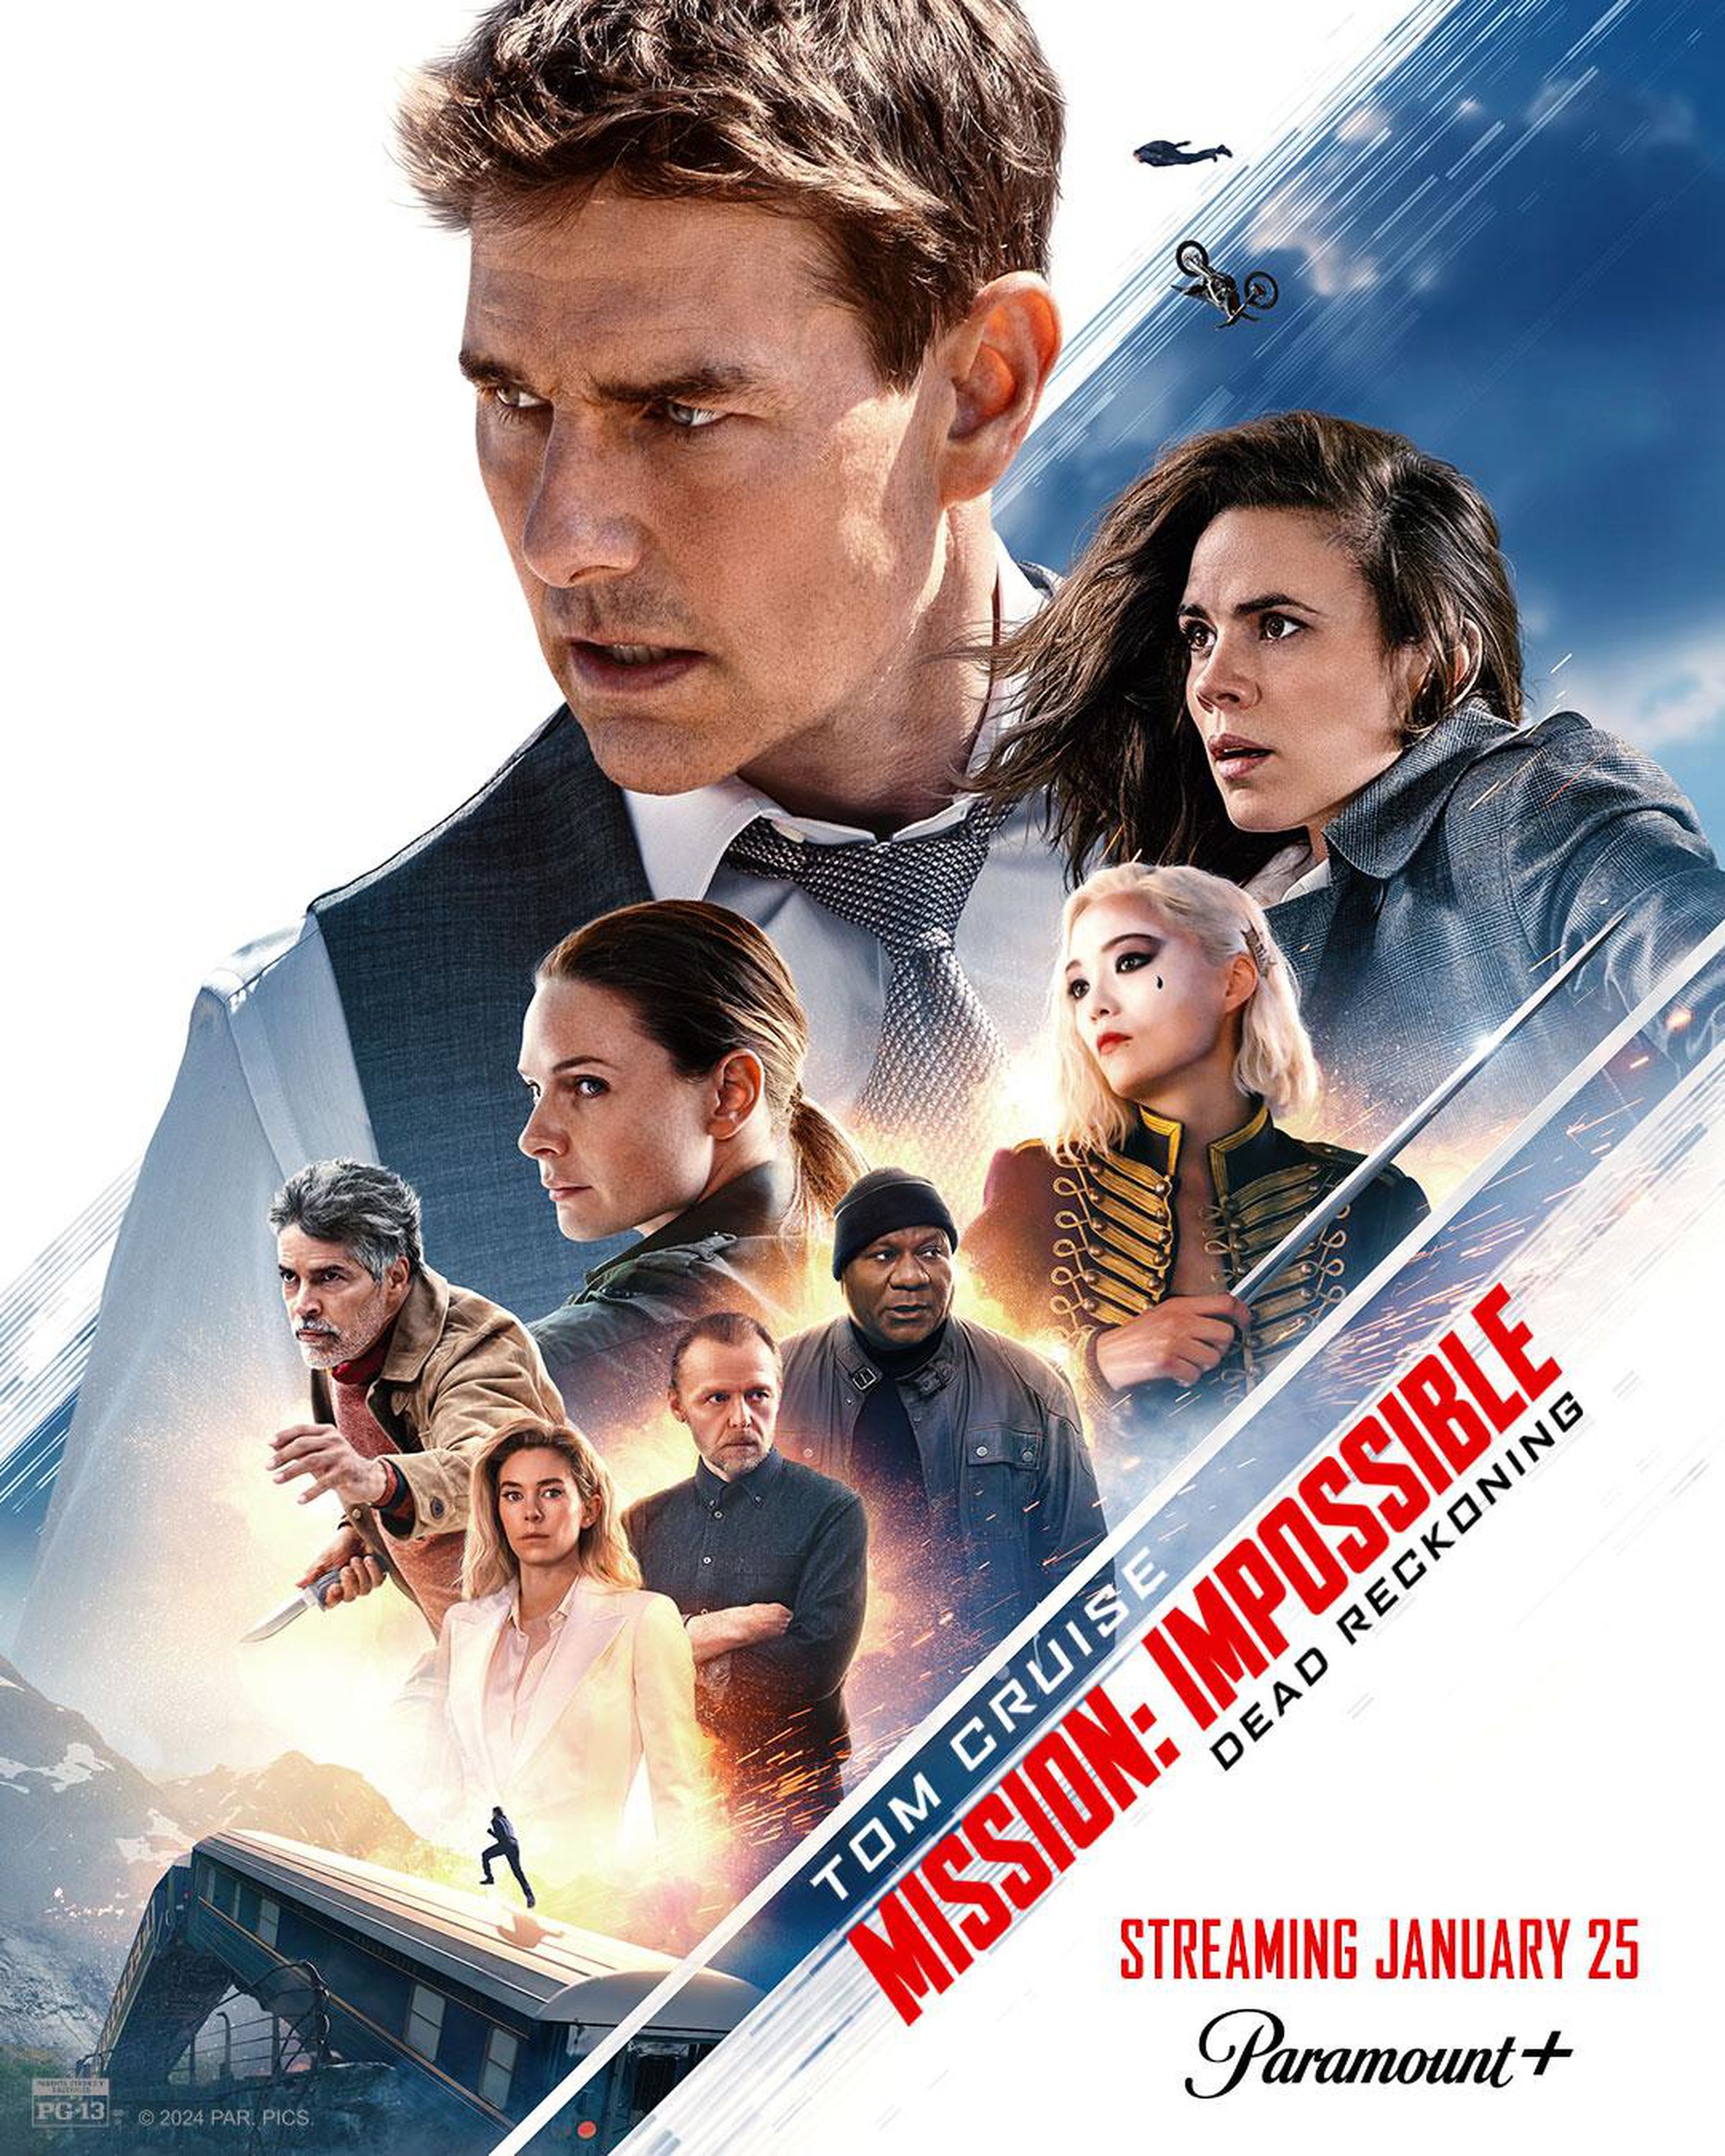 A promotional poster for Mission: Impossible — Dead Reckoning.